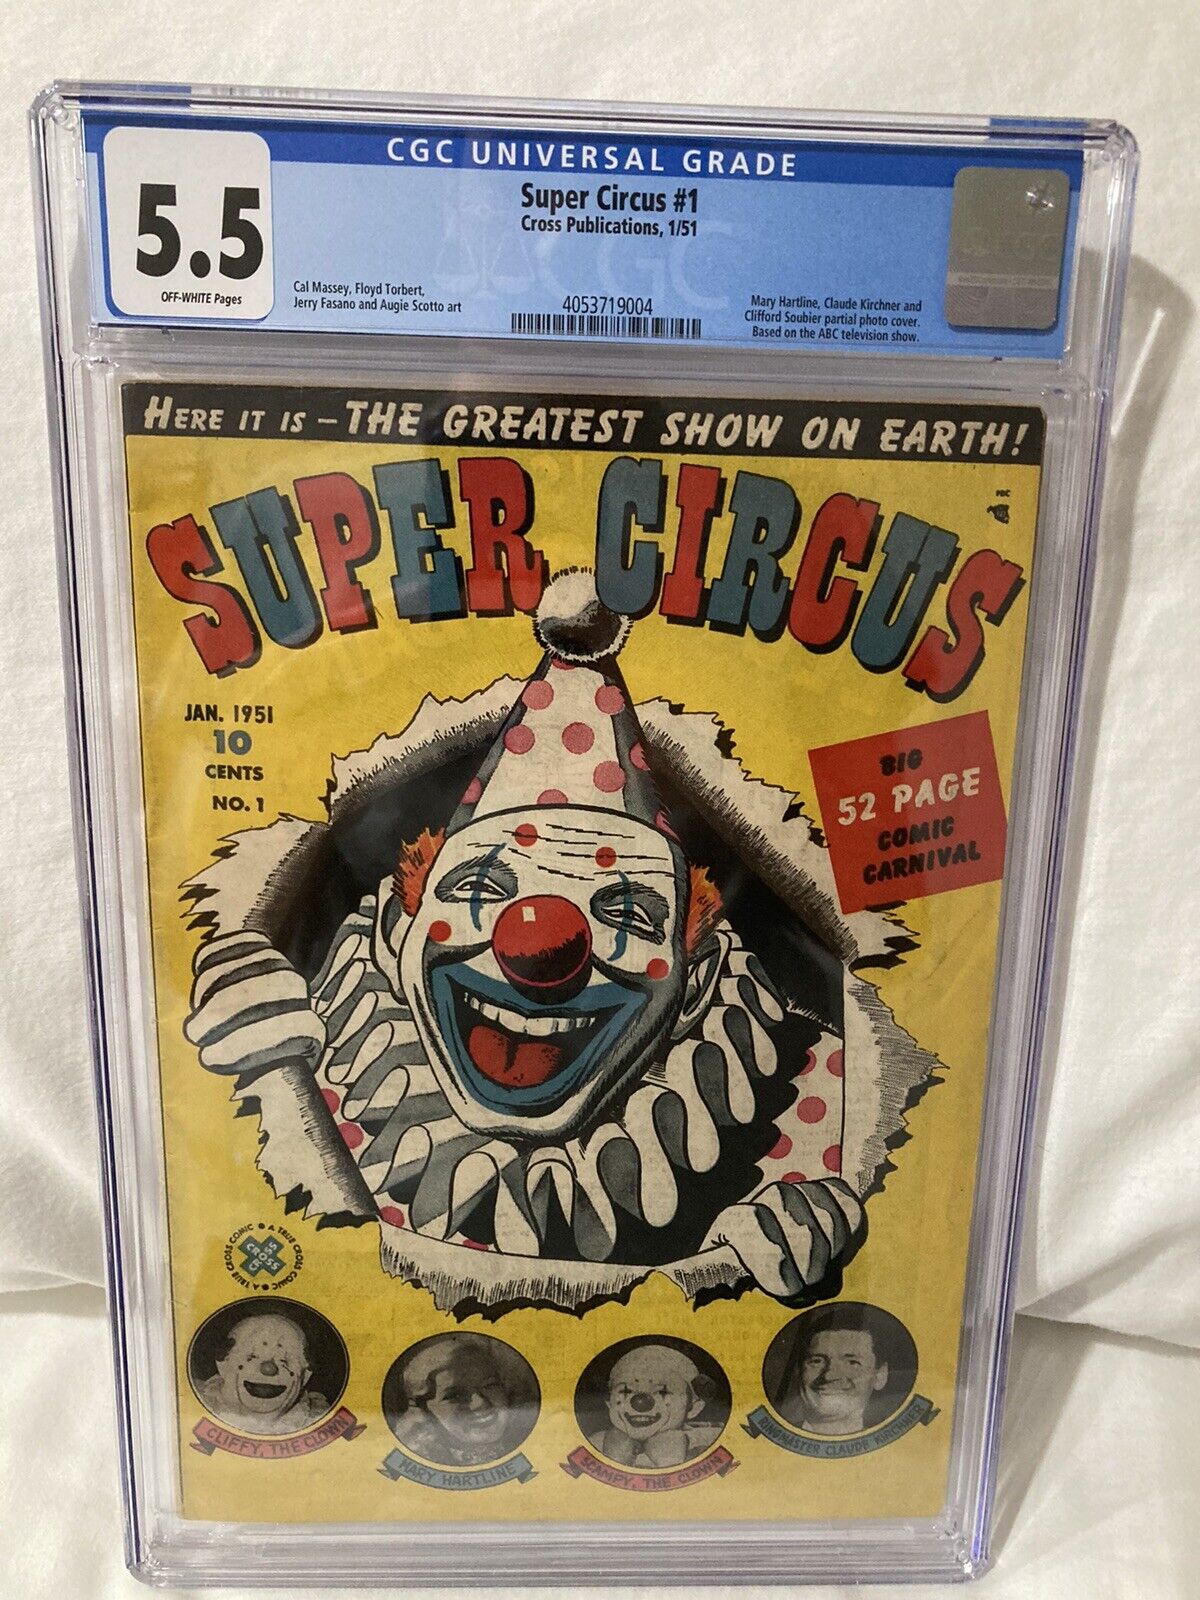 Super Circus #1 (January 1951, Cross Publications) Golden Age, CGC Graded (5.5)